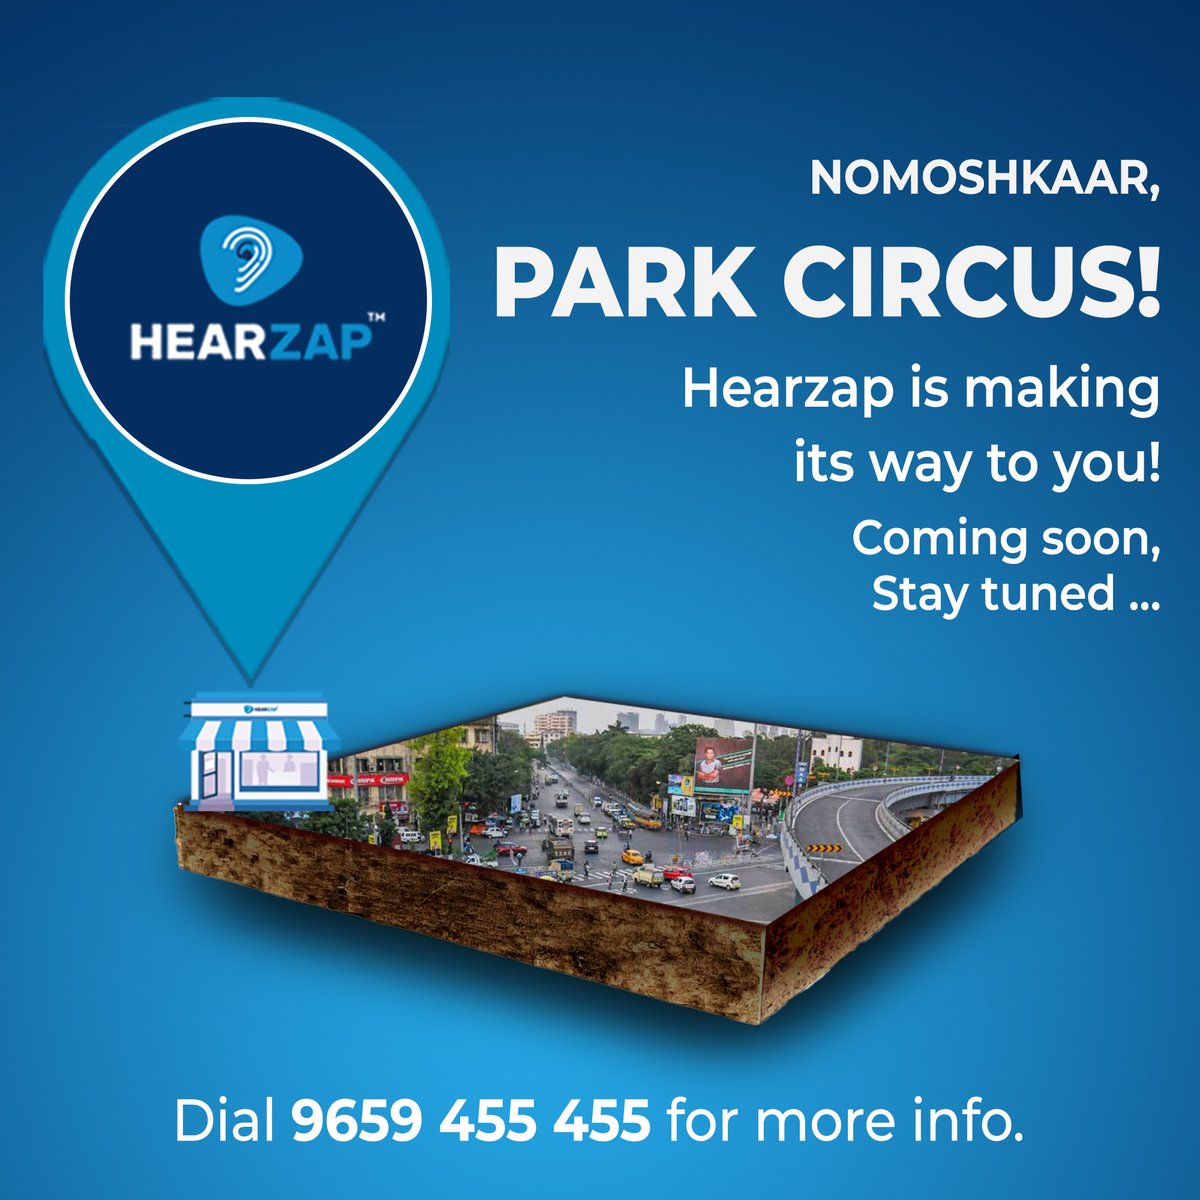 Recapture the charm of Park Circus with crystal-clear hearing! Hearzap can bring the joy of sound back into your life, with a simple visit. Stay tuned! #parkcircus #kolkata #WestBengal #hearzap #StayTuned